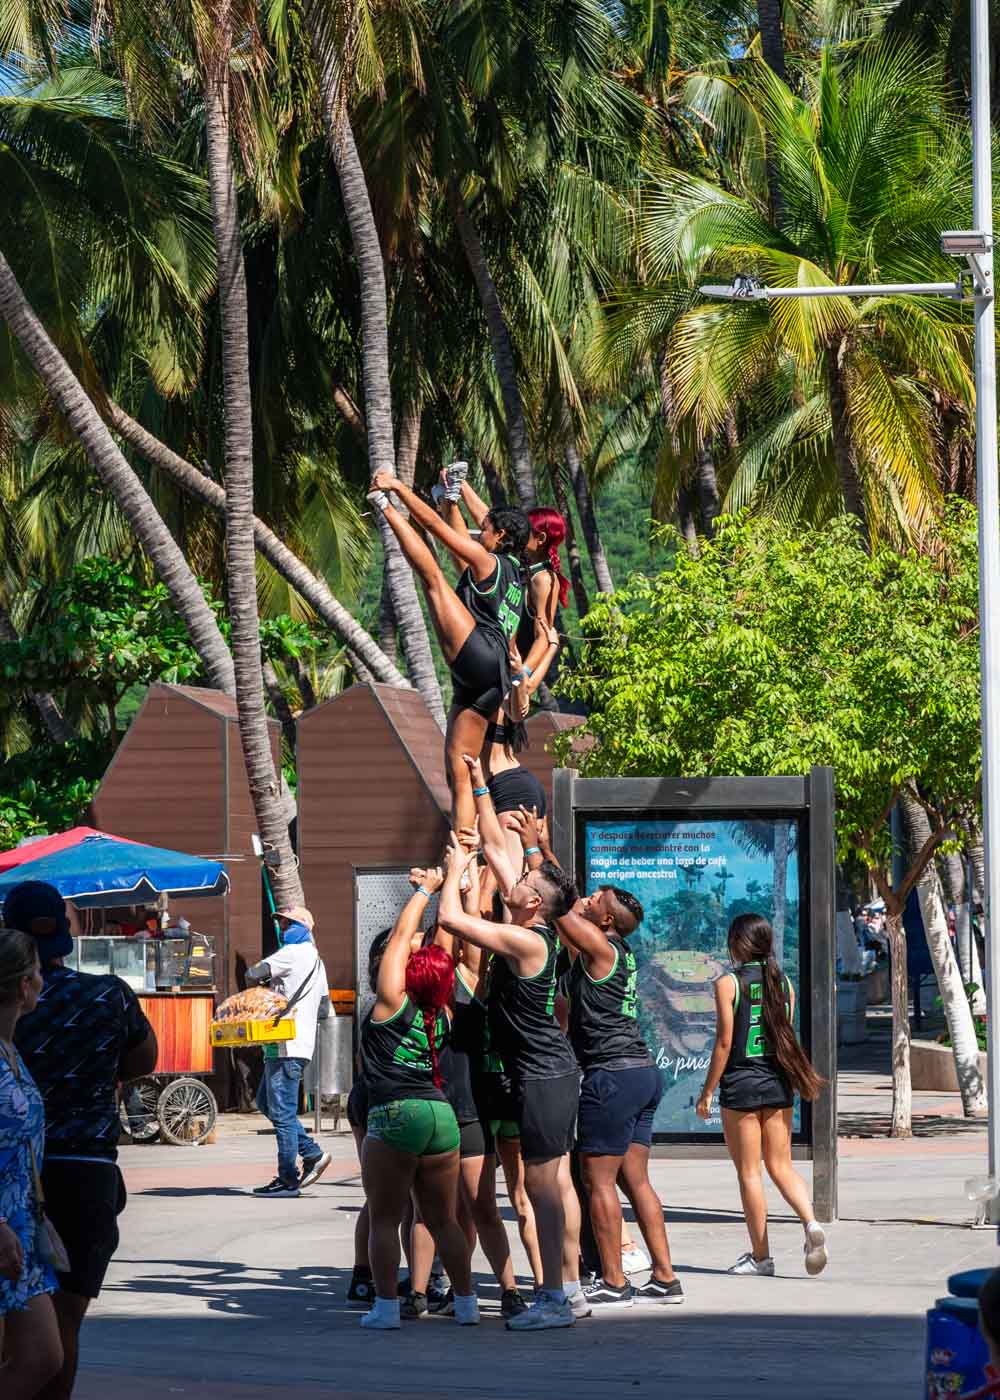 Cheerleaders wearing black and green clothes practicing on Rodadero promenade beside tourists and palm trees.